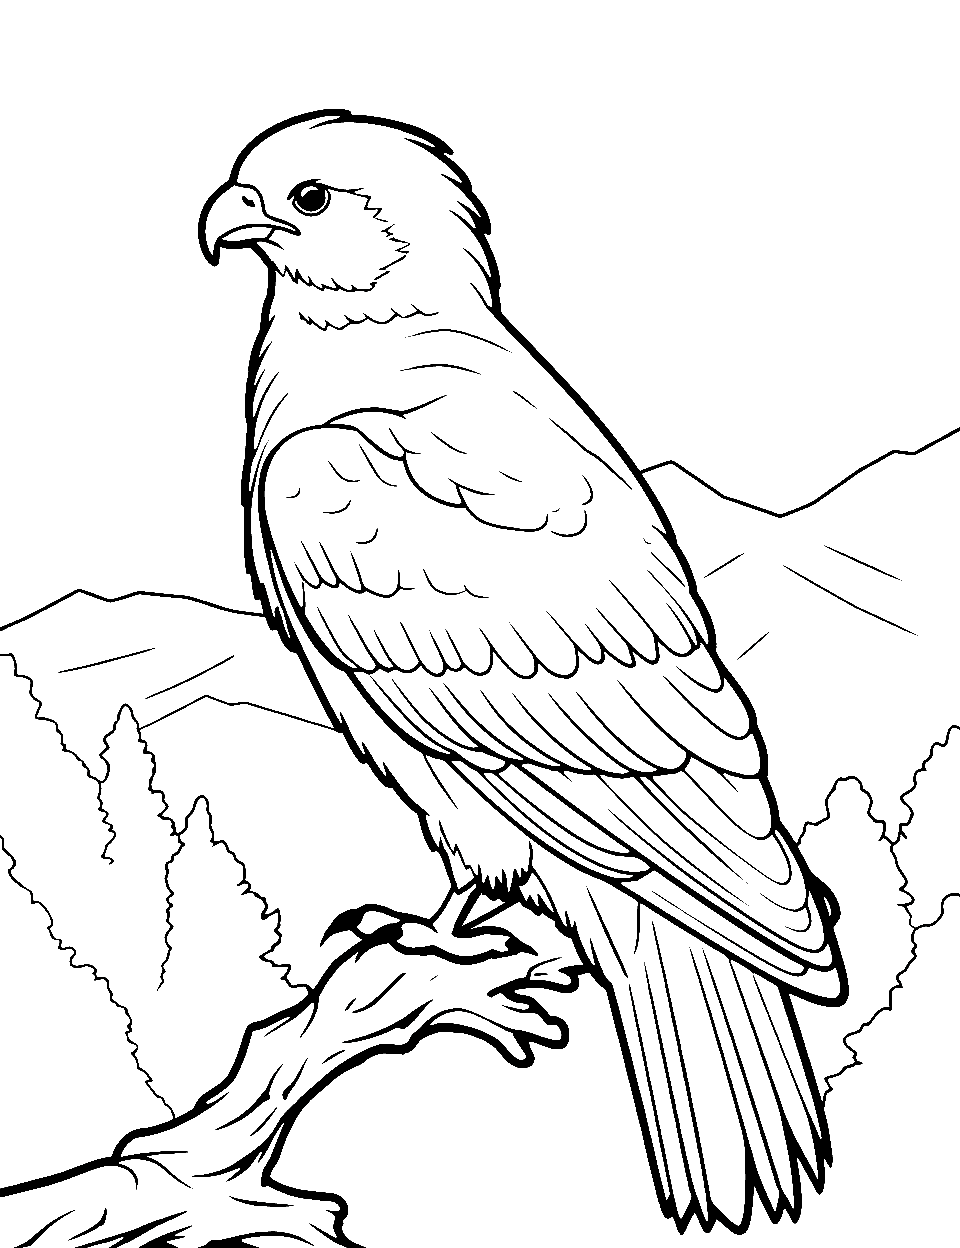 Eagle's Mountain Perch Coloring Page - An eagle perched high on a mountain overlooking a valley.